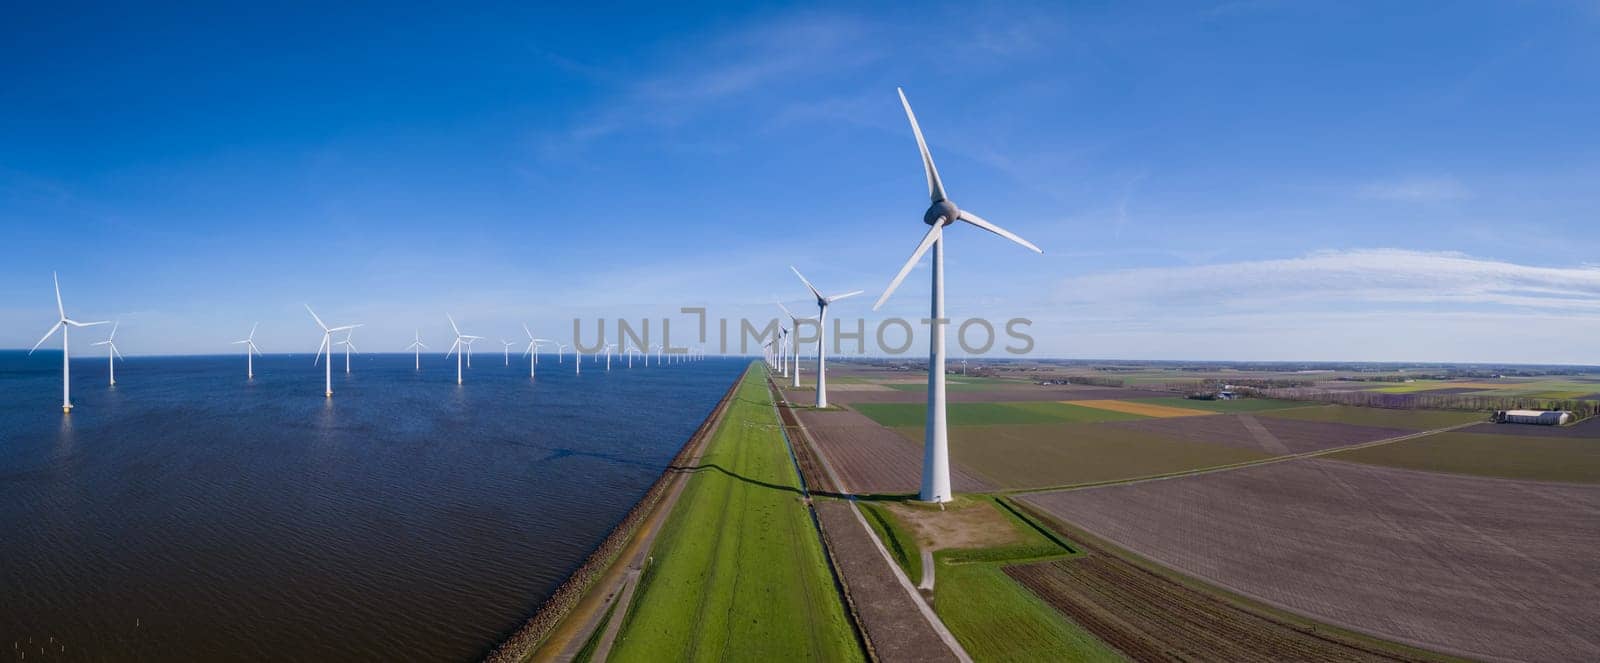 A stunning view of a row of wind turbines gracefully turning along the horizon of a vast body of water in Flevoland, Netherlands during the vibrant season of Spring.